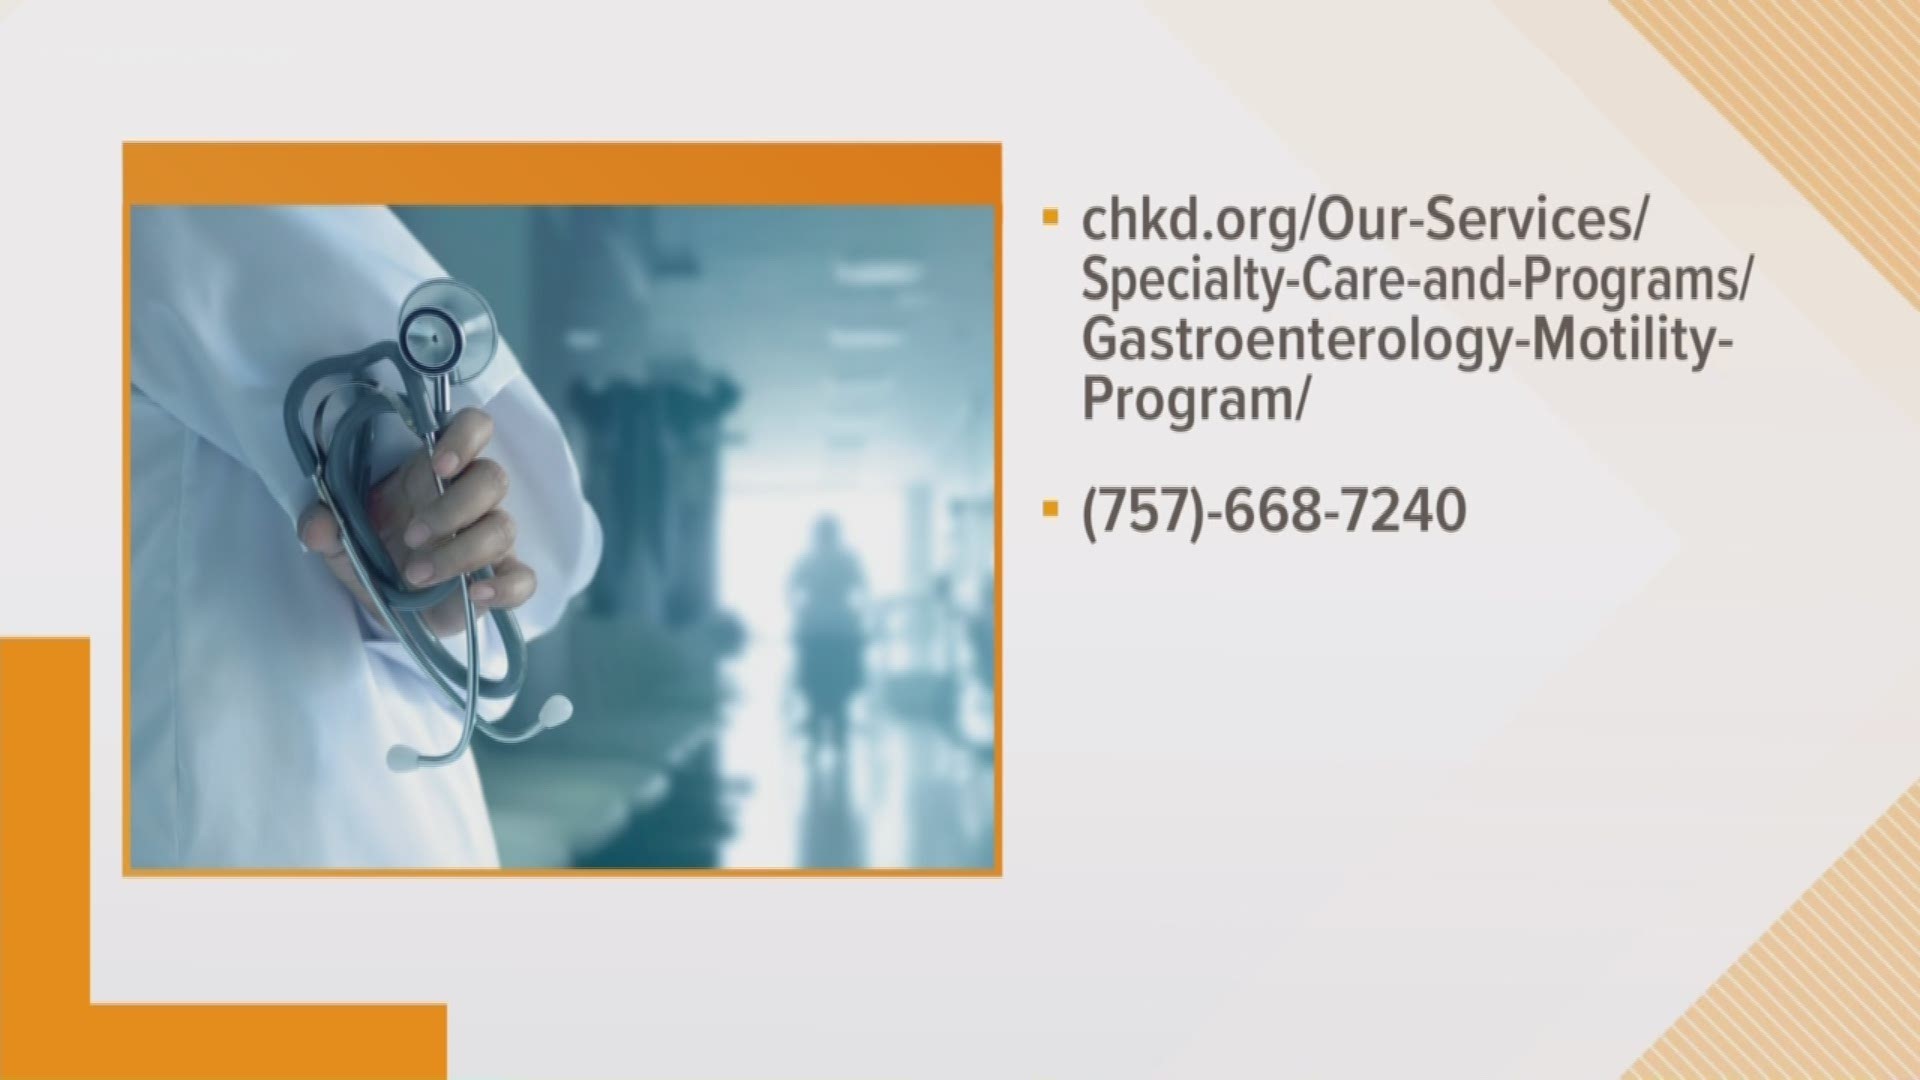 If your child suffers from digestive system problems, CHKD has a Motility Program designed to help him or her.